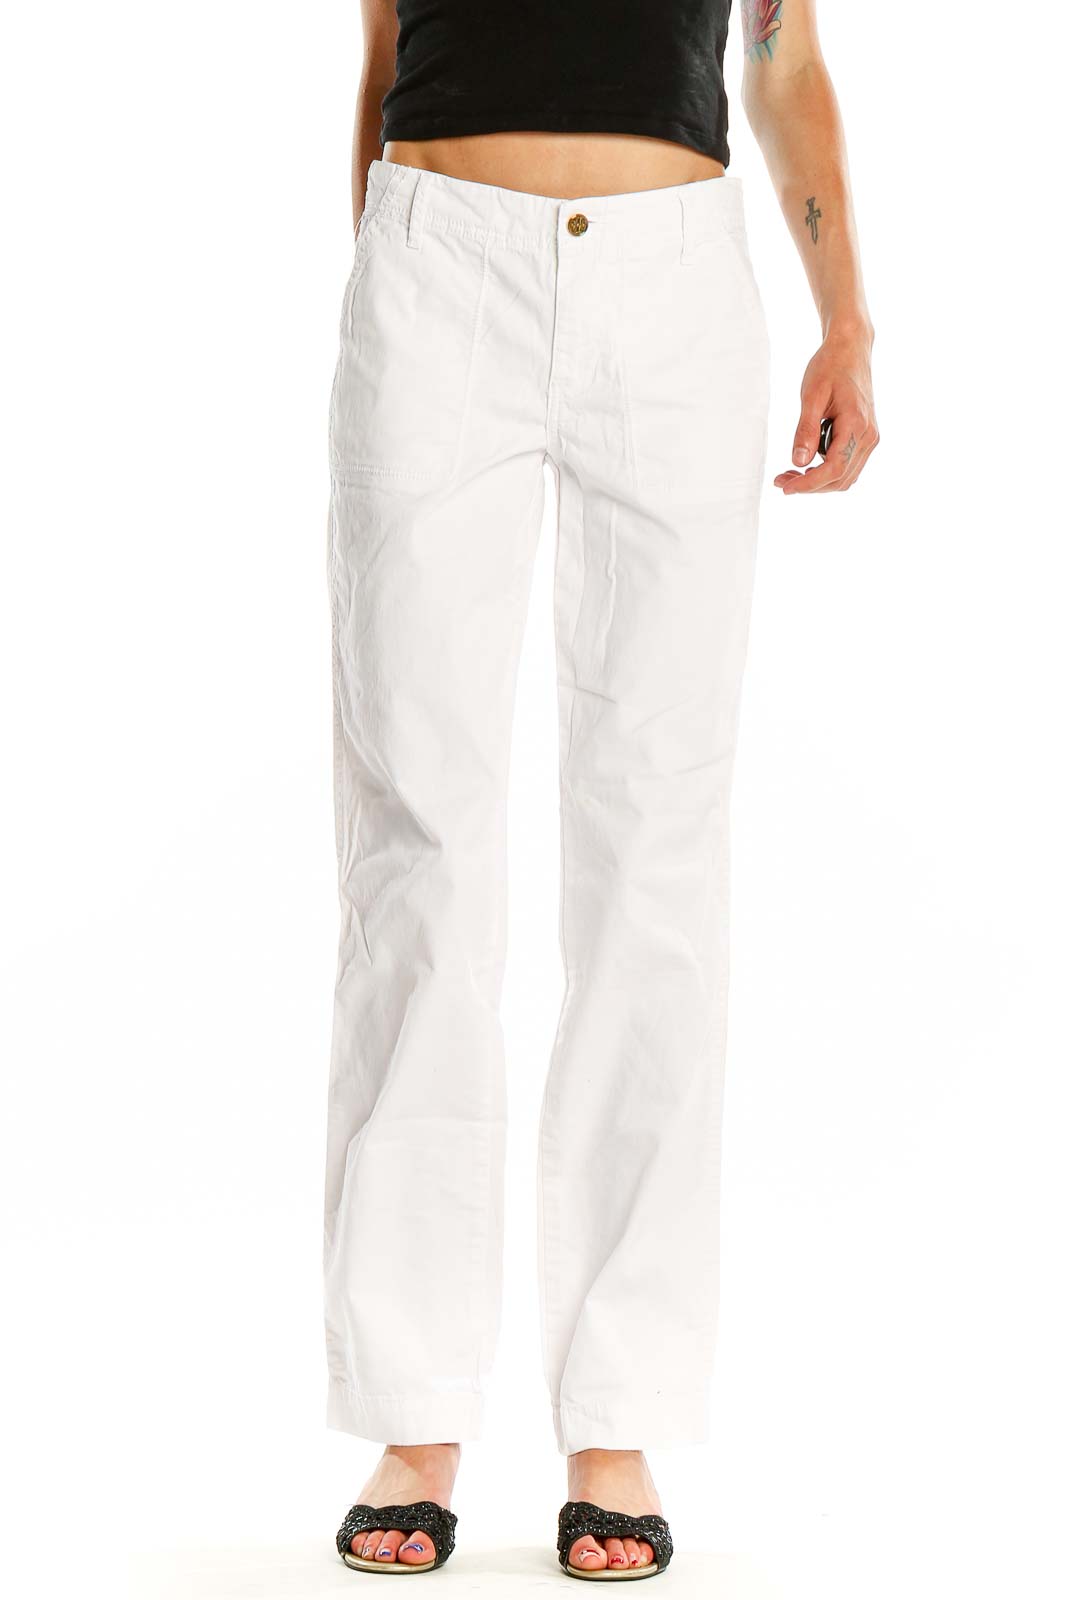 White All Day Wear Straight Leg Pants Front